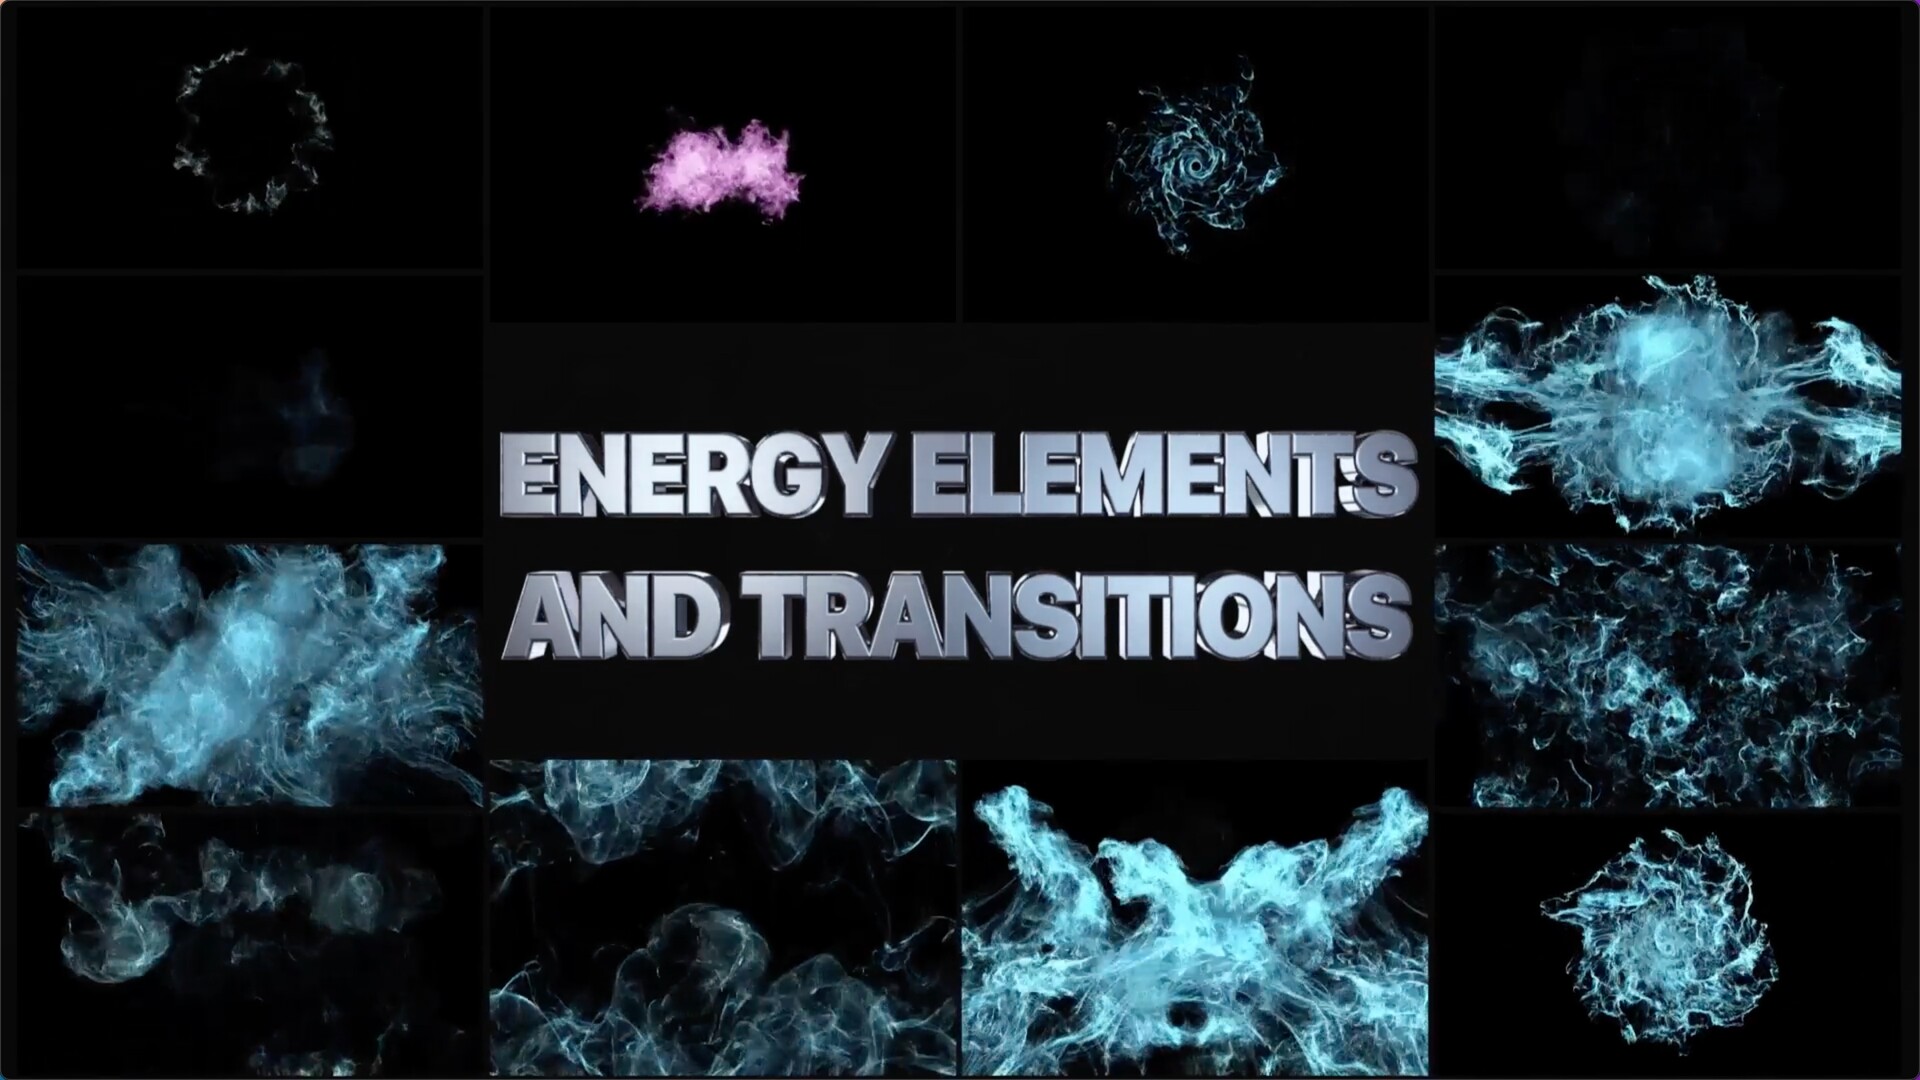 fcpx插件:12个彩色能量模拟元素字幕发生器(VFX Energy Elements And Transitions)